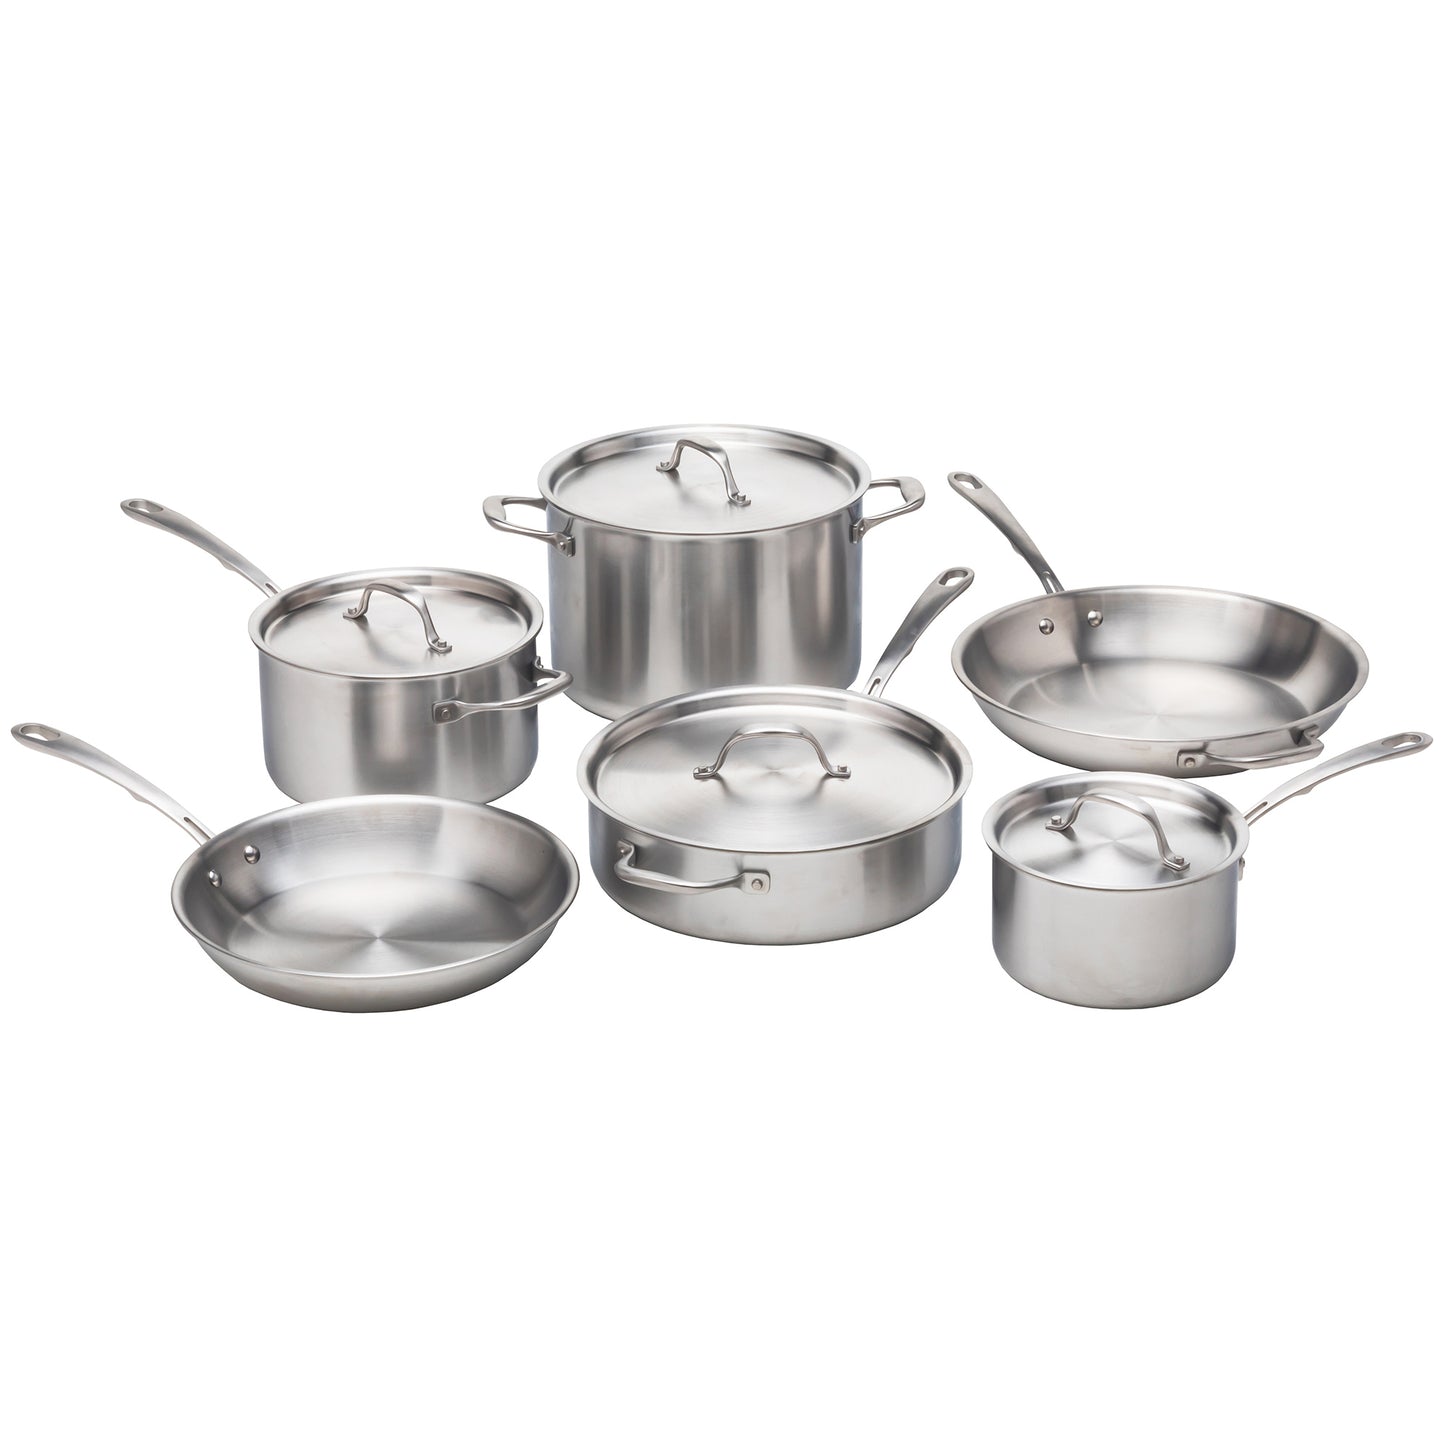 Premium 5-Ply Fully Clad Stainless Steel Set, 10 Pc.